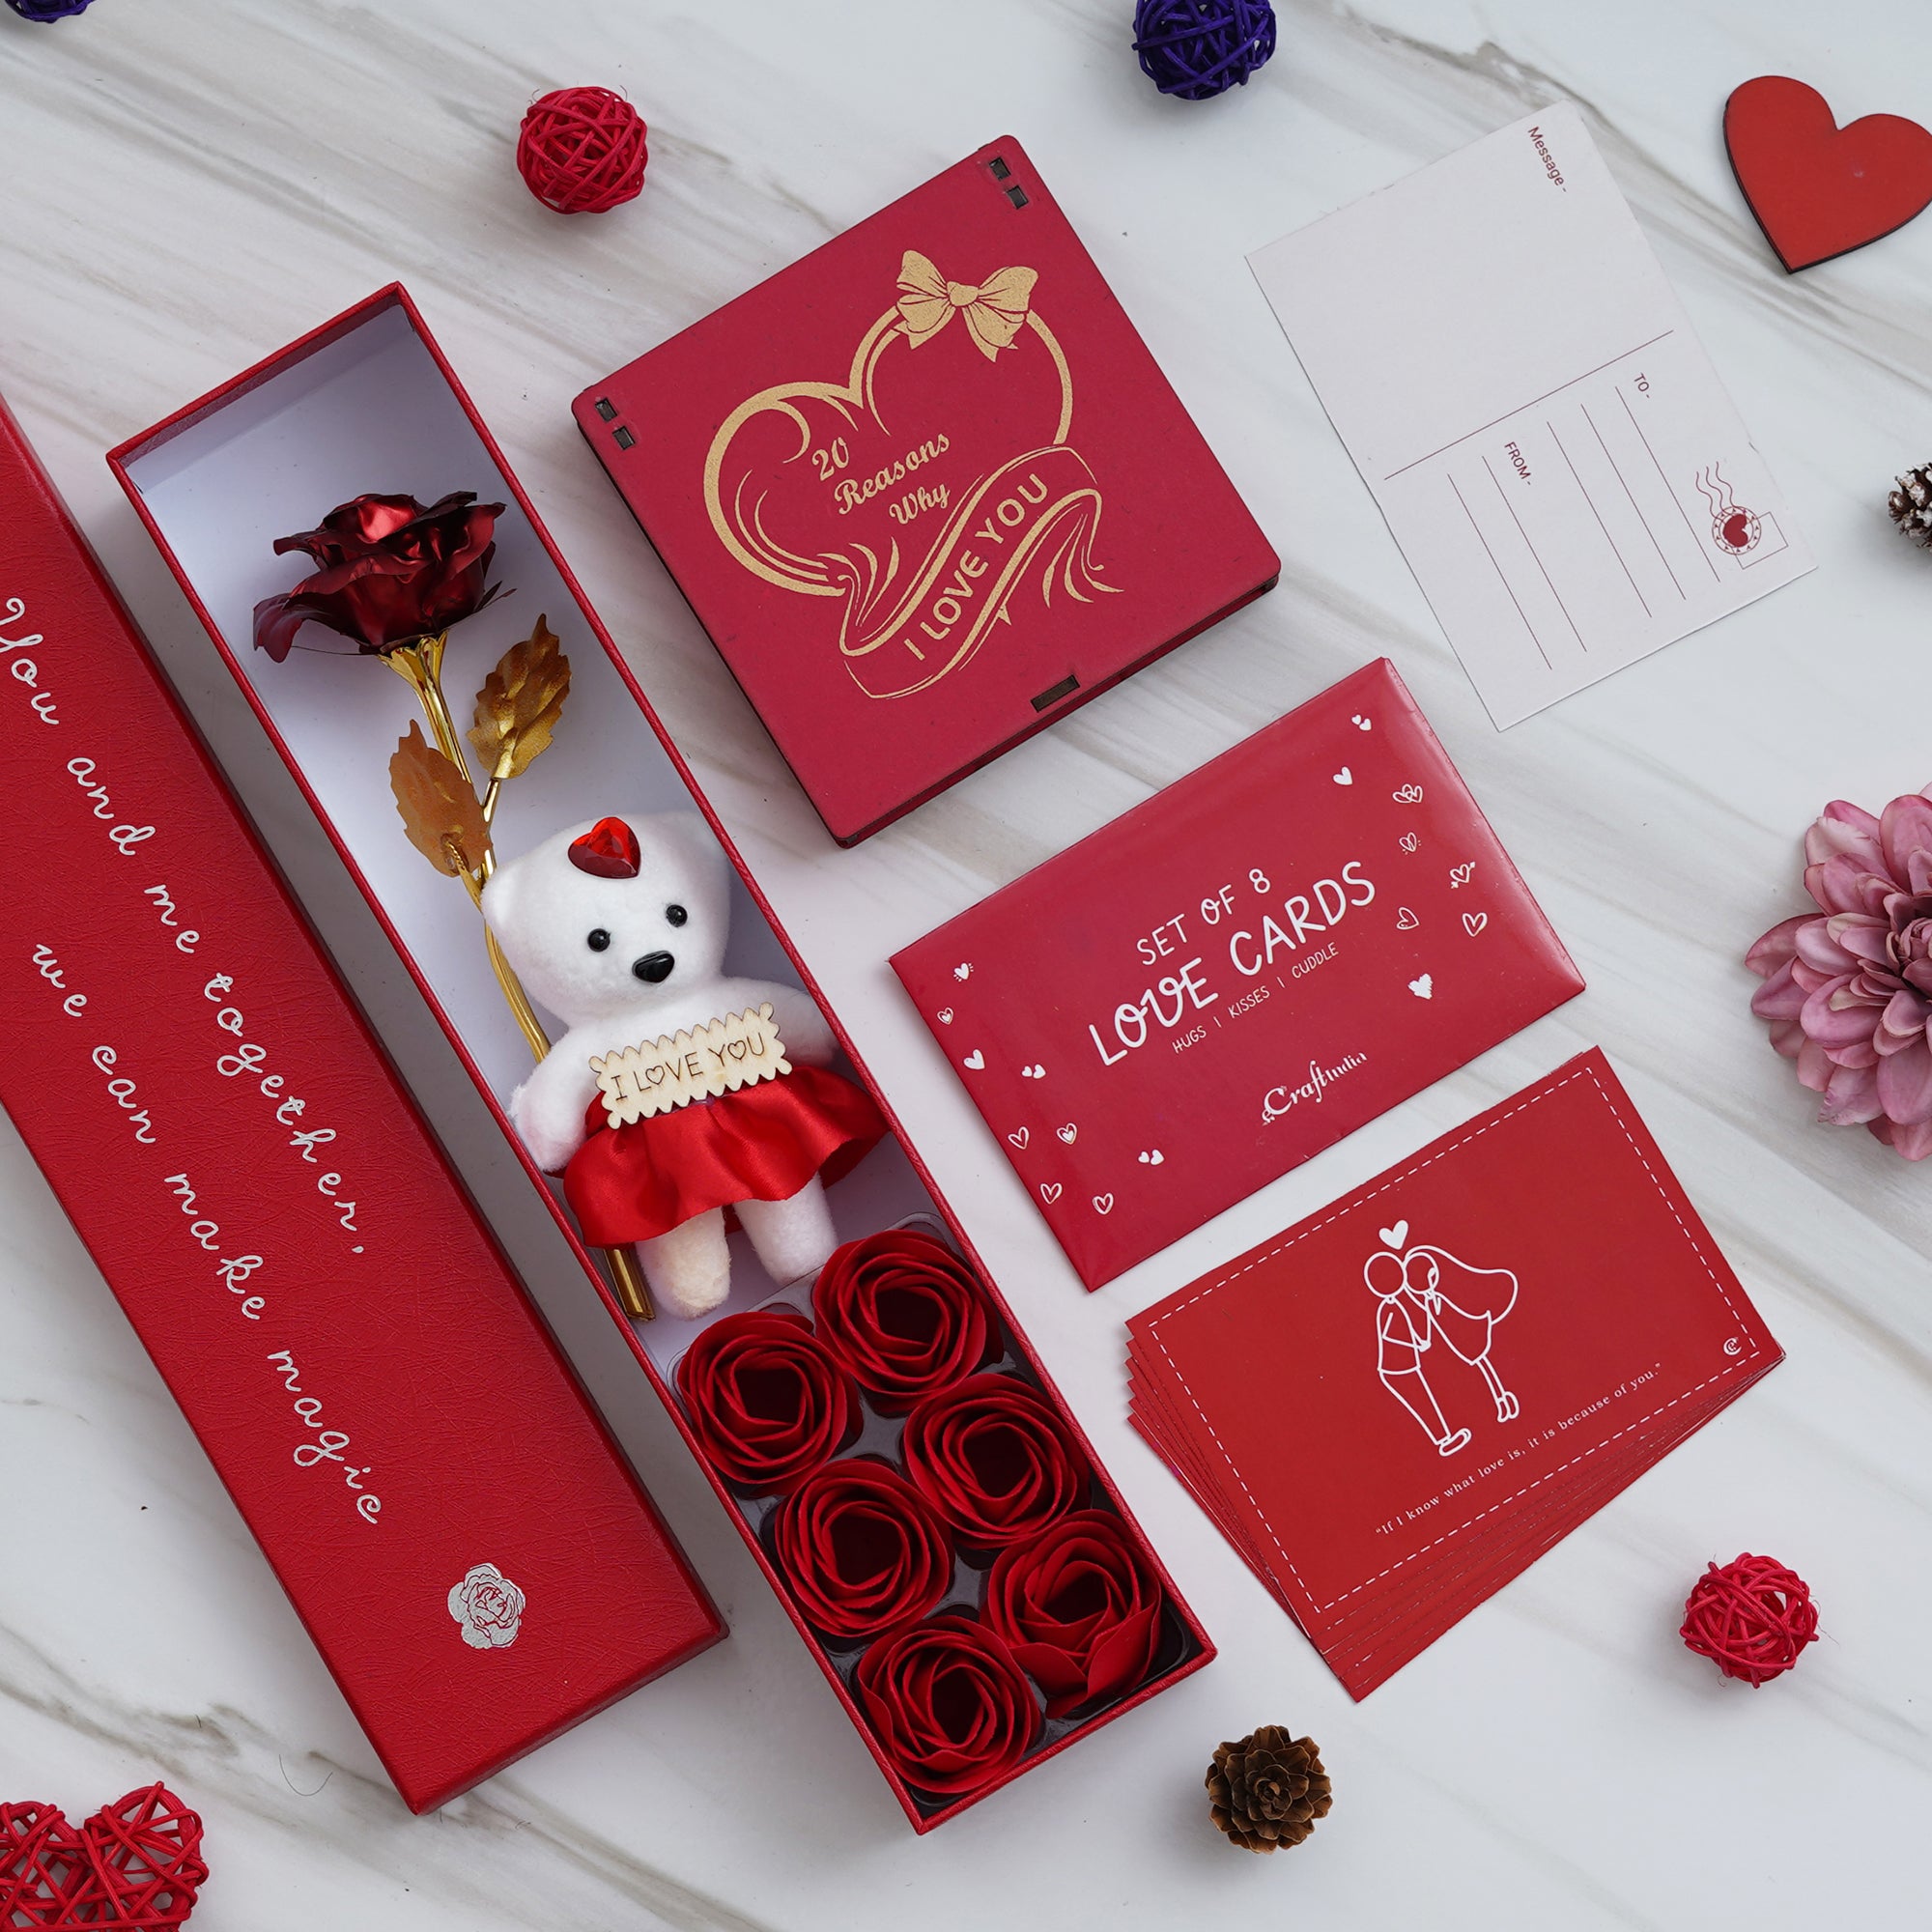 Valentine Combo of Pack of 8 Love Gift Cards, Red Gift Box with Teddy & Roses, "20 Reasons Why I Love You" Printed on Little Red Hearts Decorative Wooden Gift Set Box